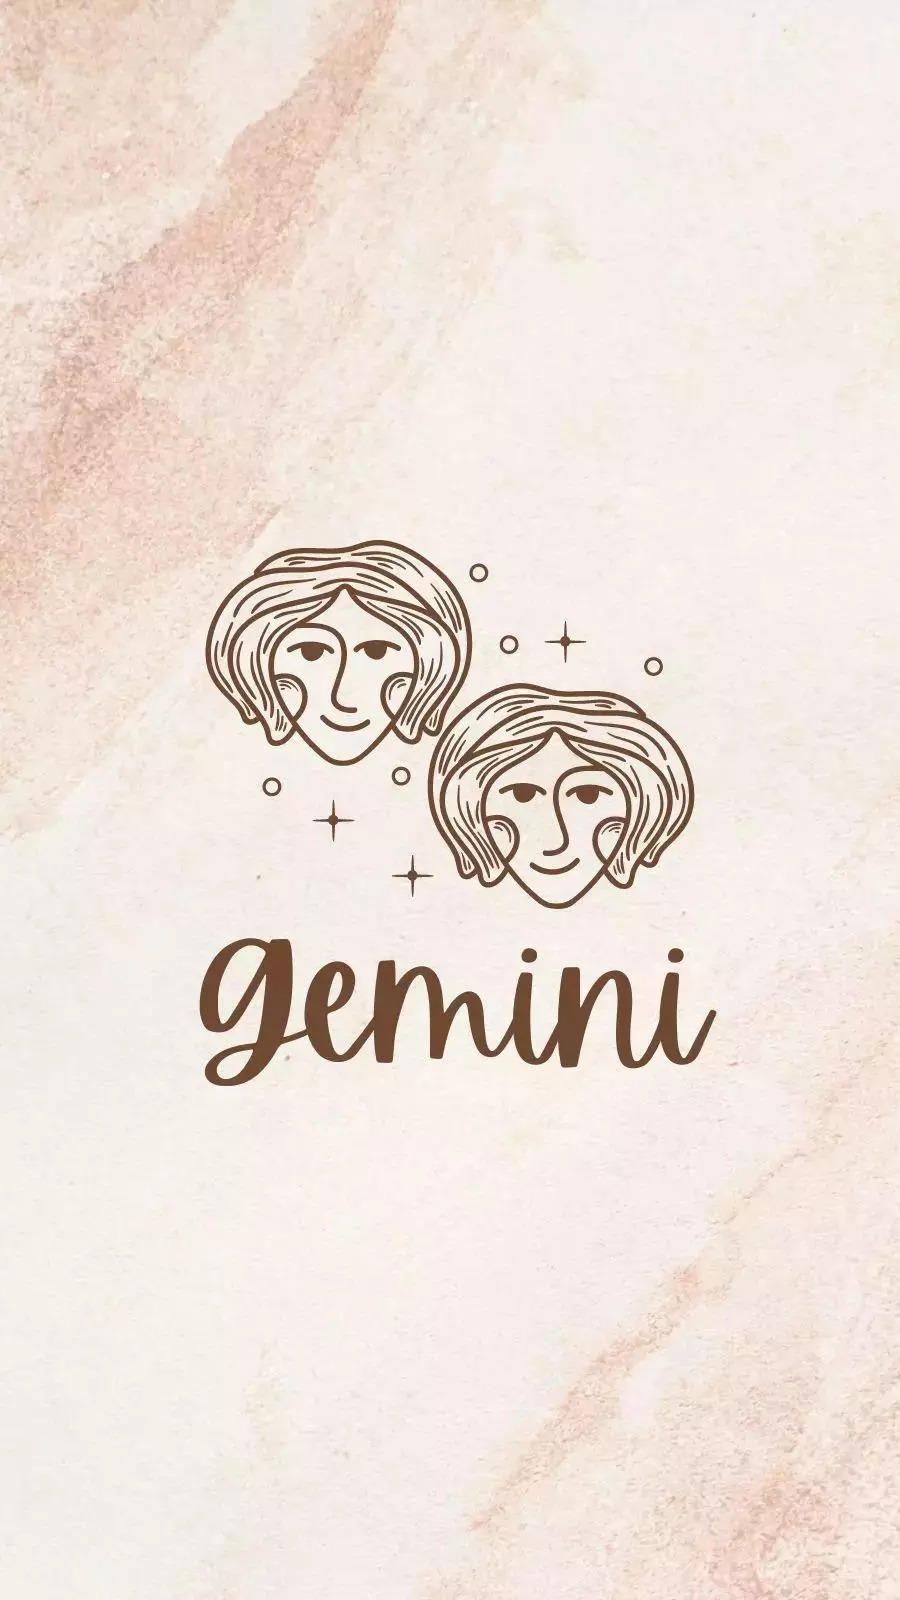 Gemini zodiac sign wallpaper for iPhone. Get your personalized horoscope, daily, weekly, monthly and yearly horoscopes. - Gemini